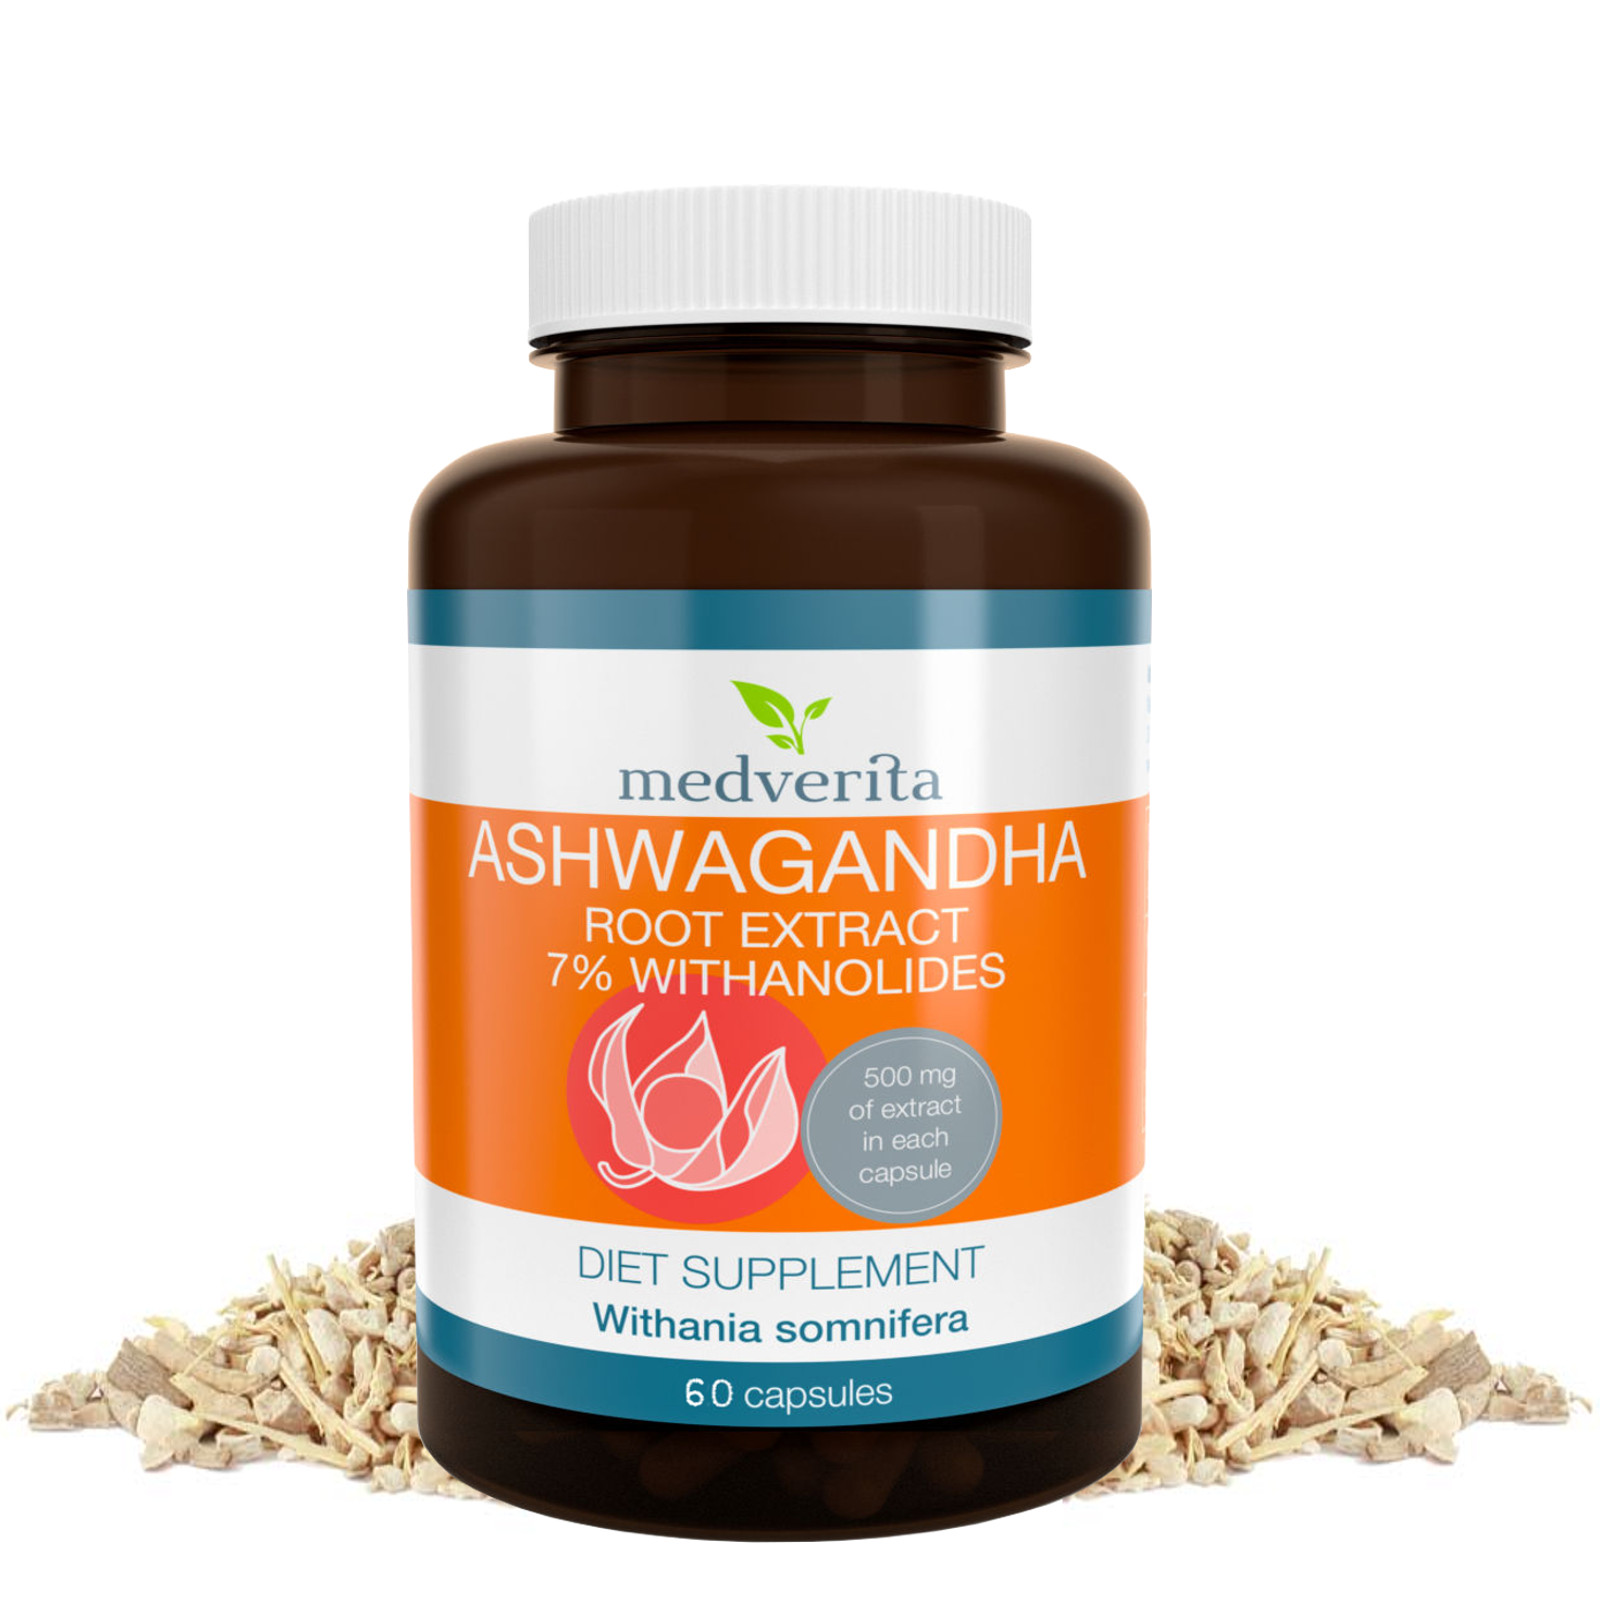 where to buy ashwagandha root extract